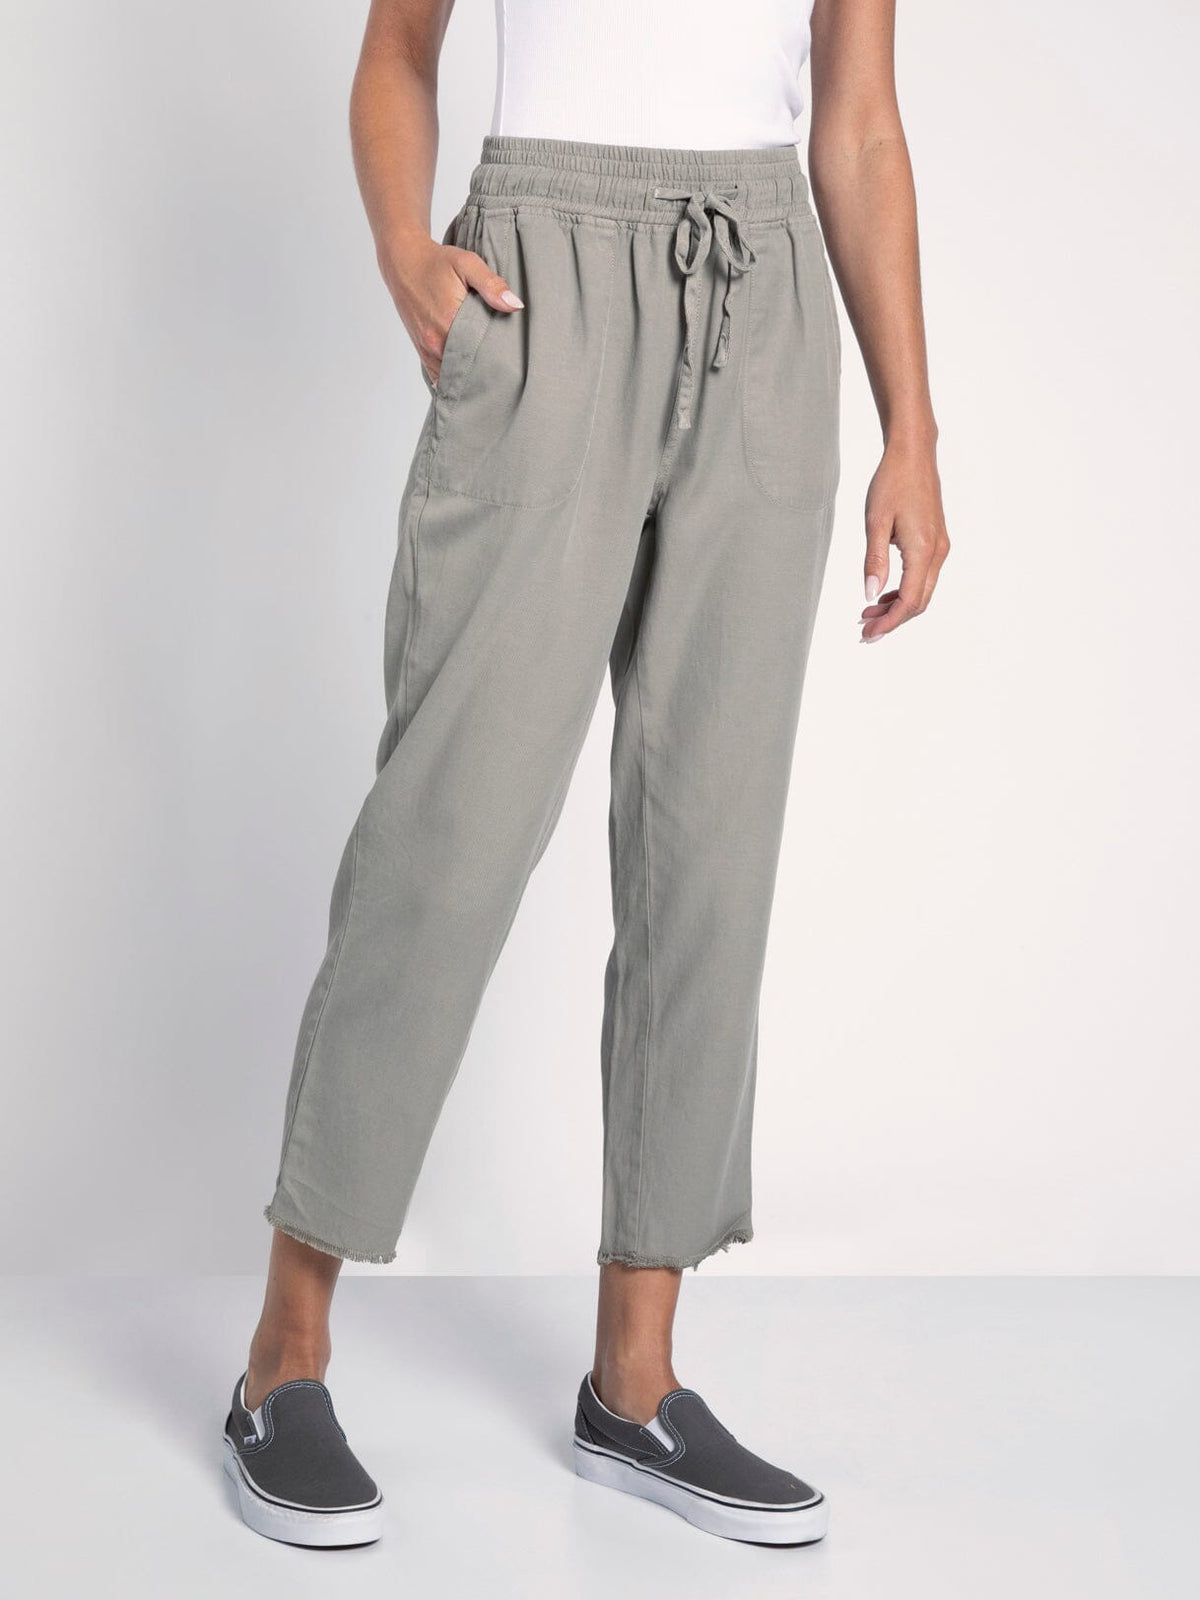 FLORENCE PANTS - PRE PACK 6 UNITS